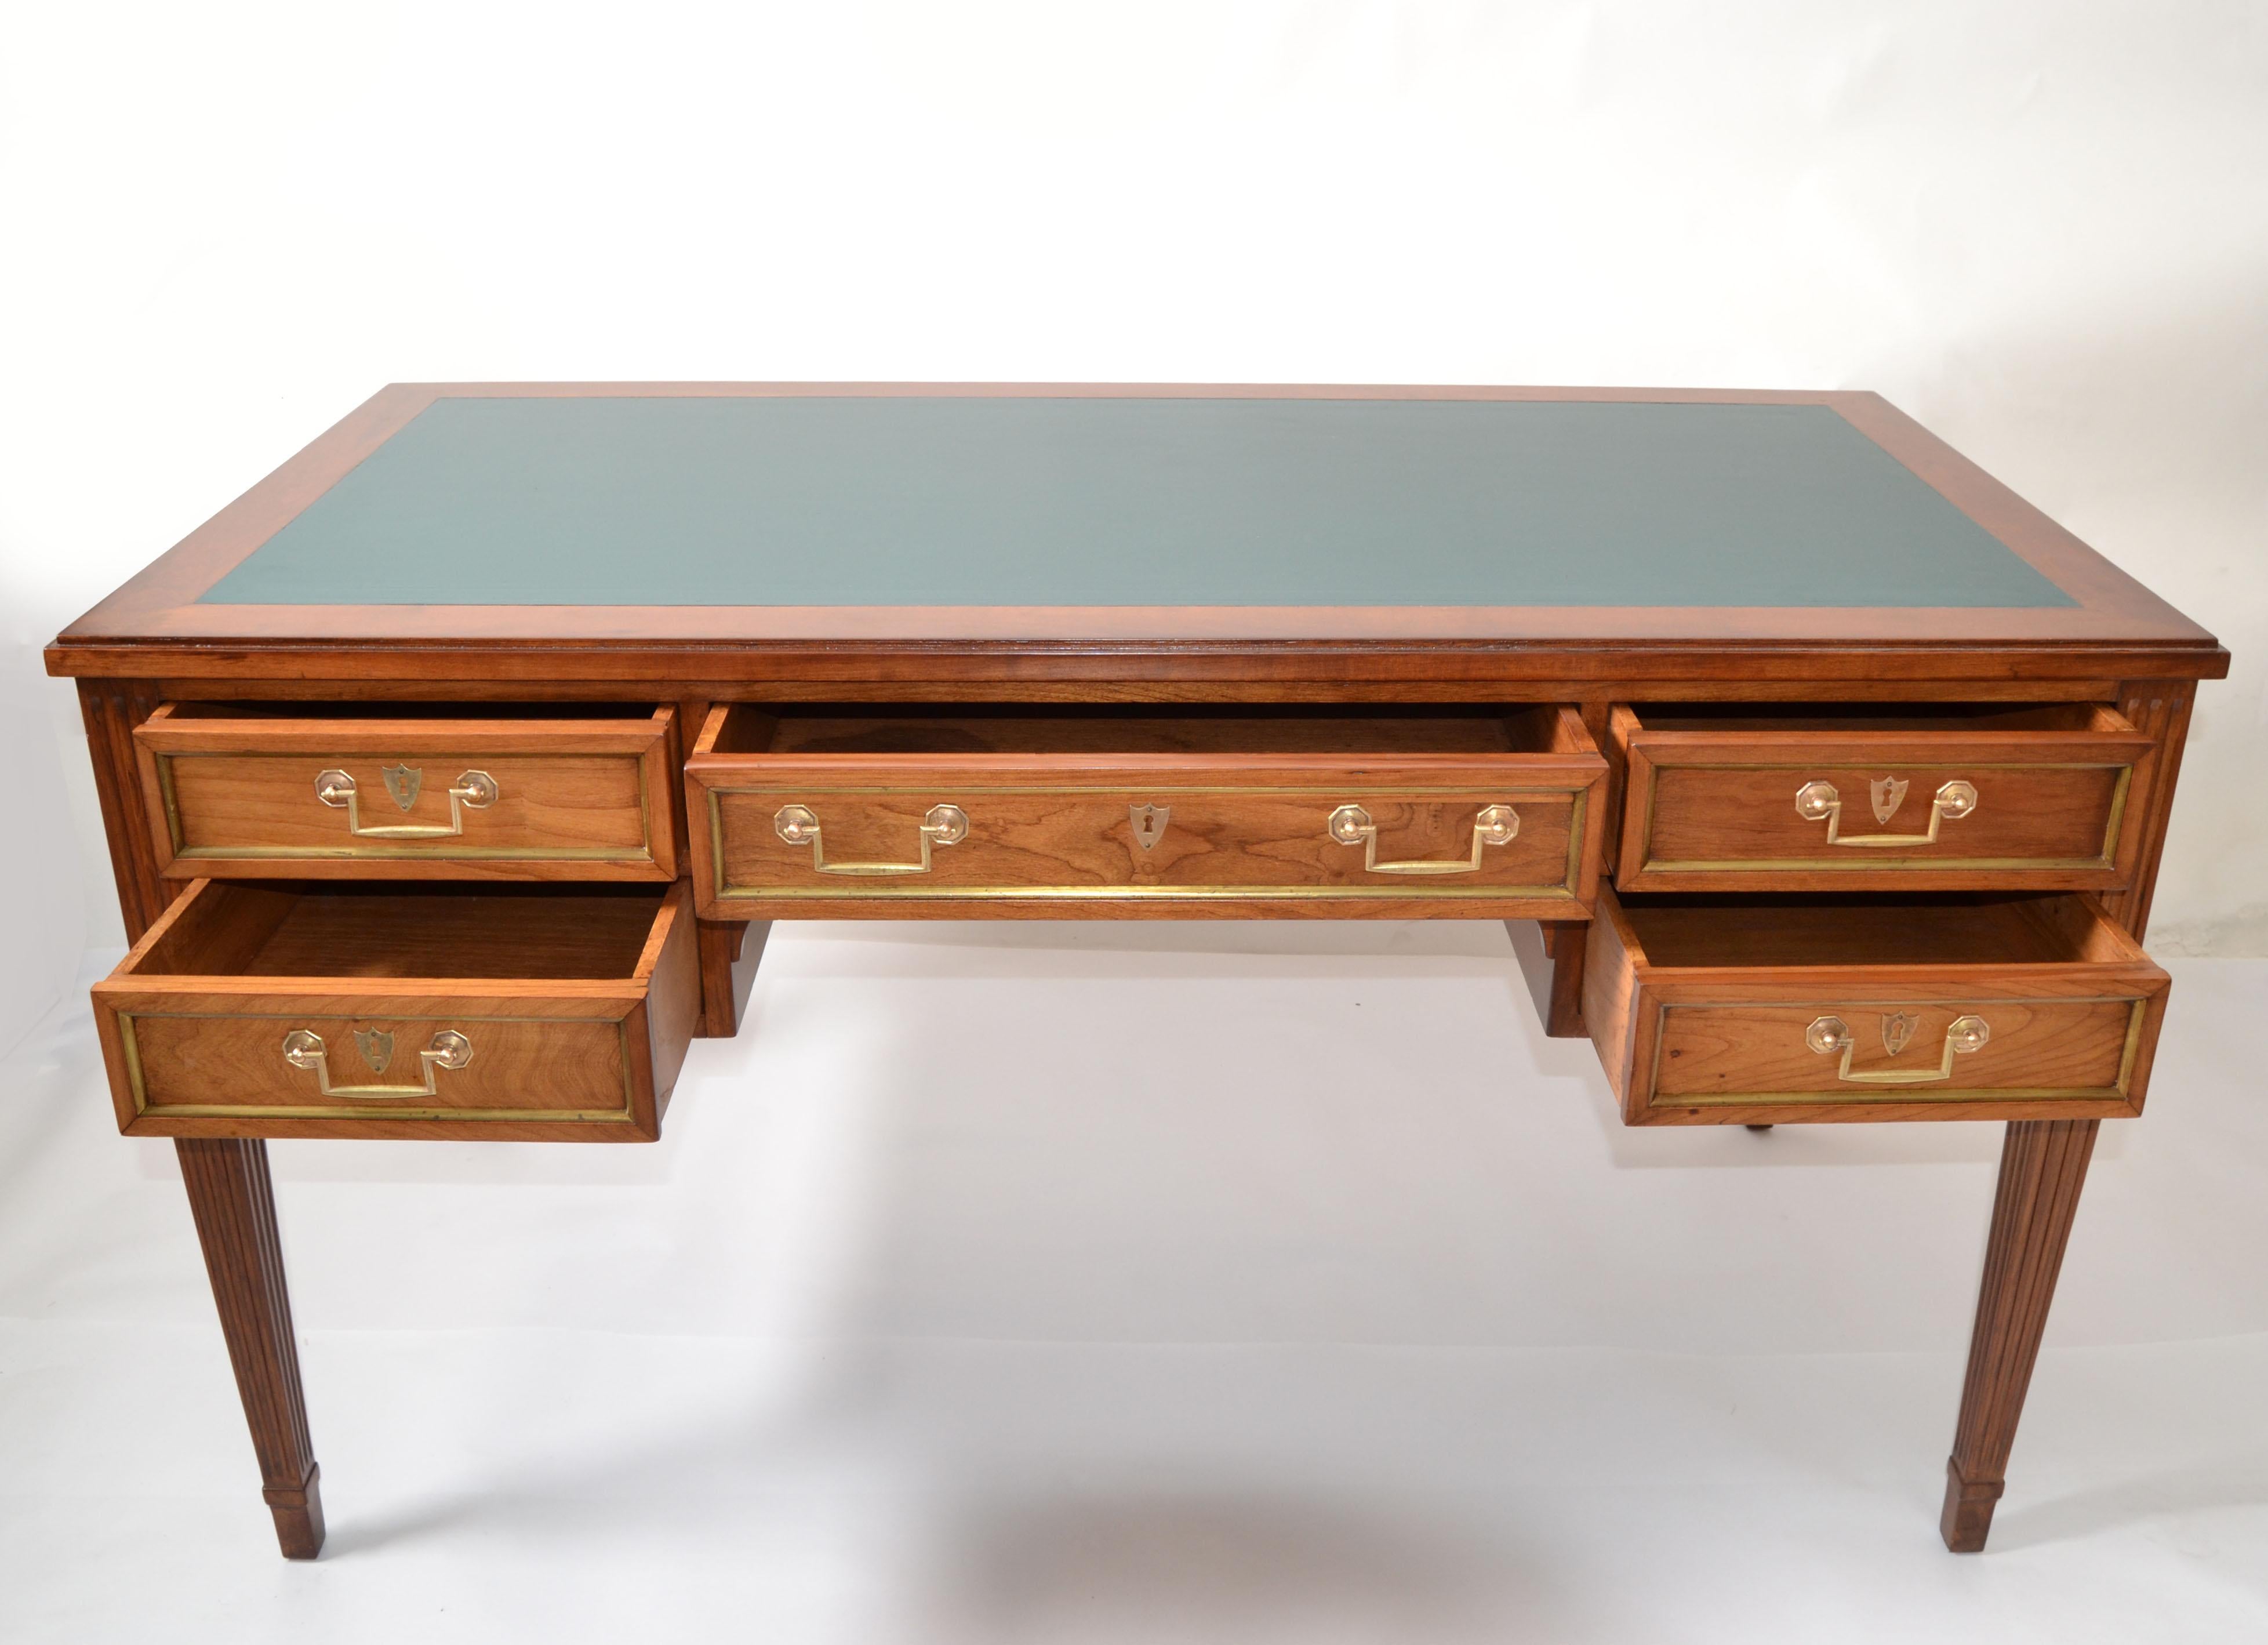 American Hollywood Regency large 5 dovetailed Drawer Walnut and green Leather Top Writing Table, Desk with Brass Hardware.
Fully Restored and ready for a new Home.
Table Knee Clearance: 24 inches.
Leg space Width: 21 inches.
Leather Top Size: 48.5 x